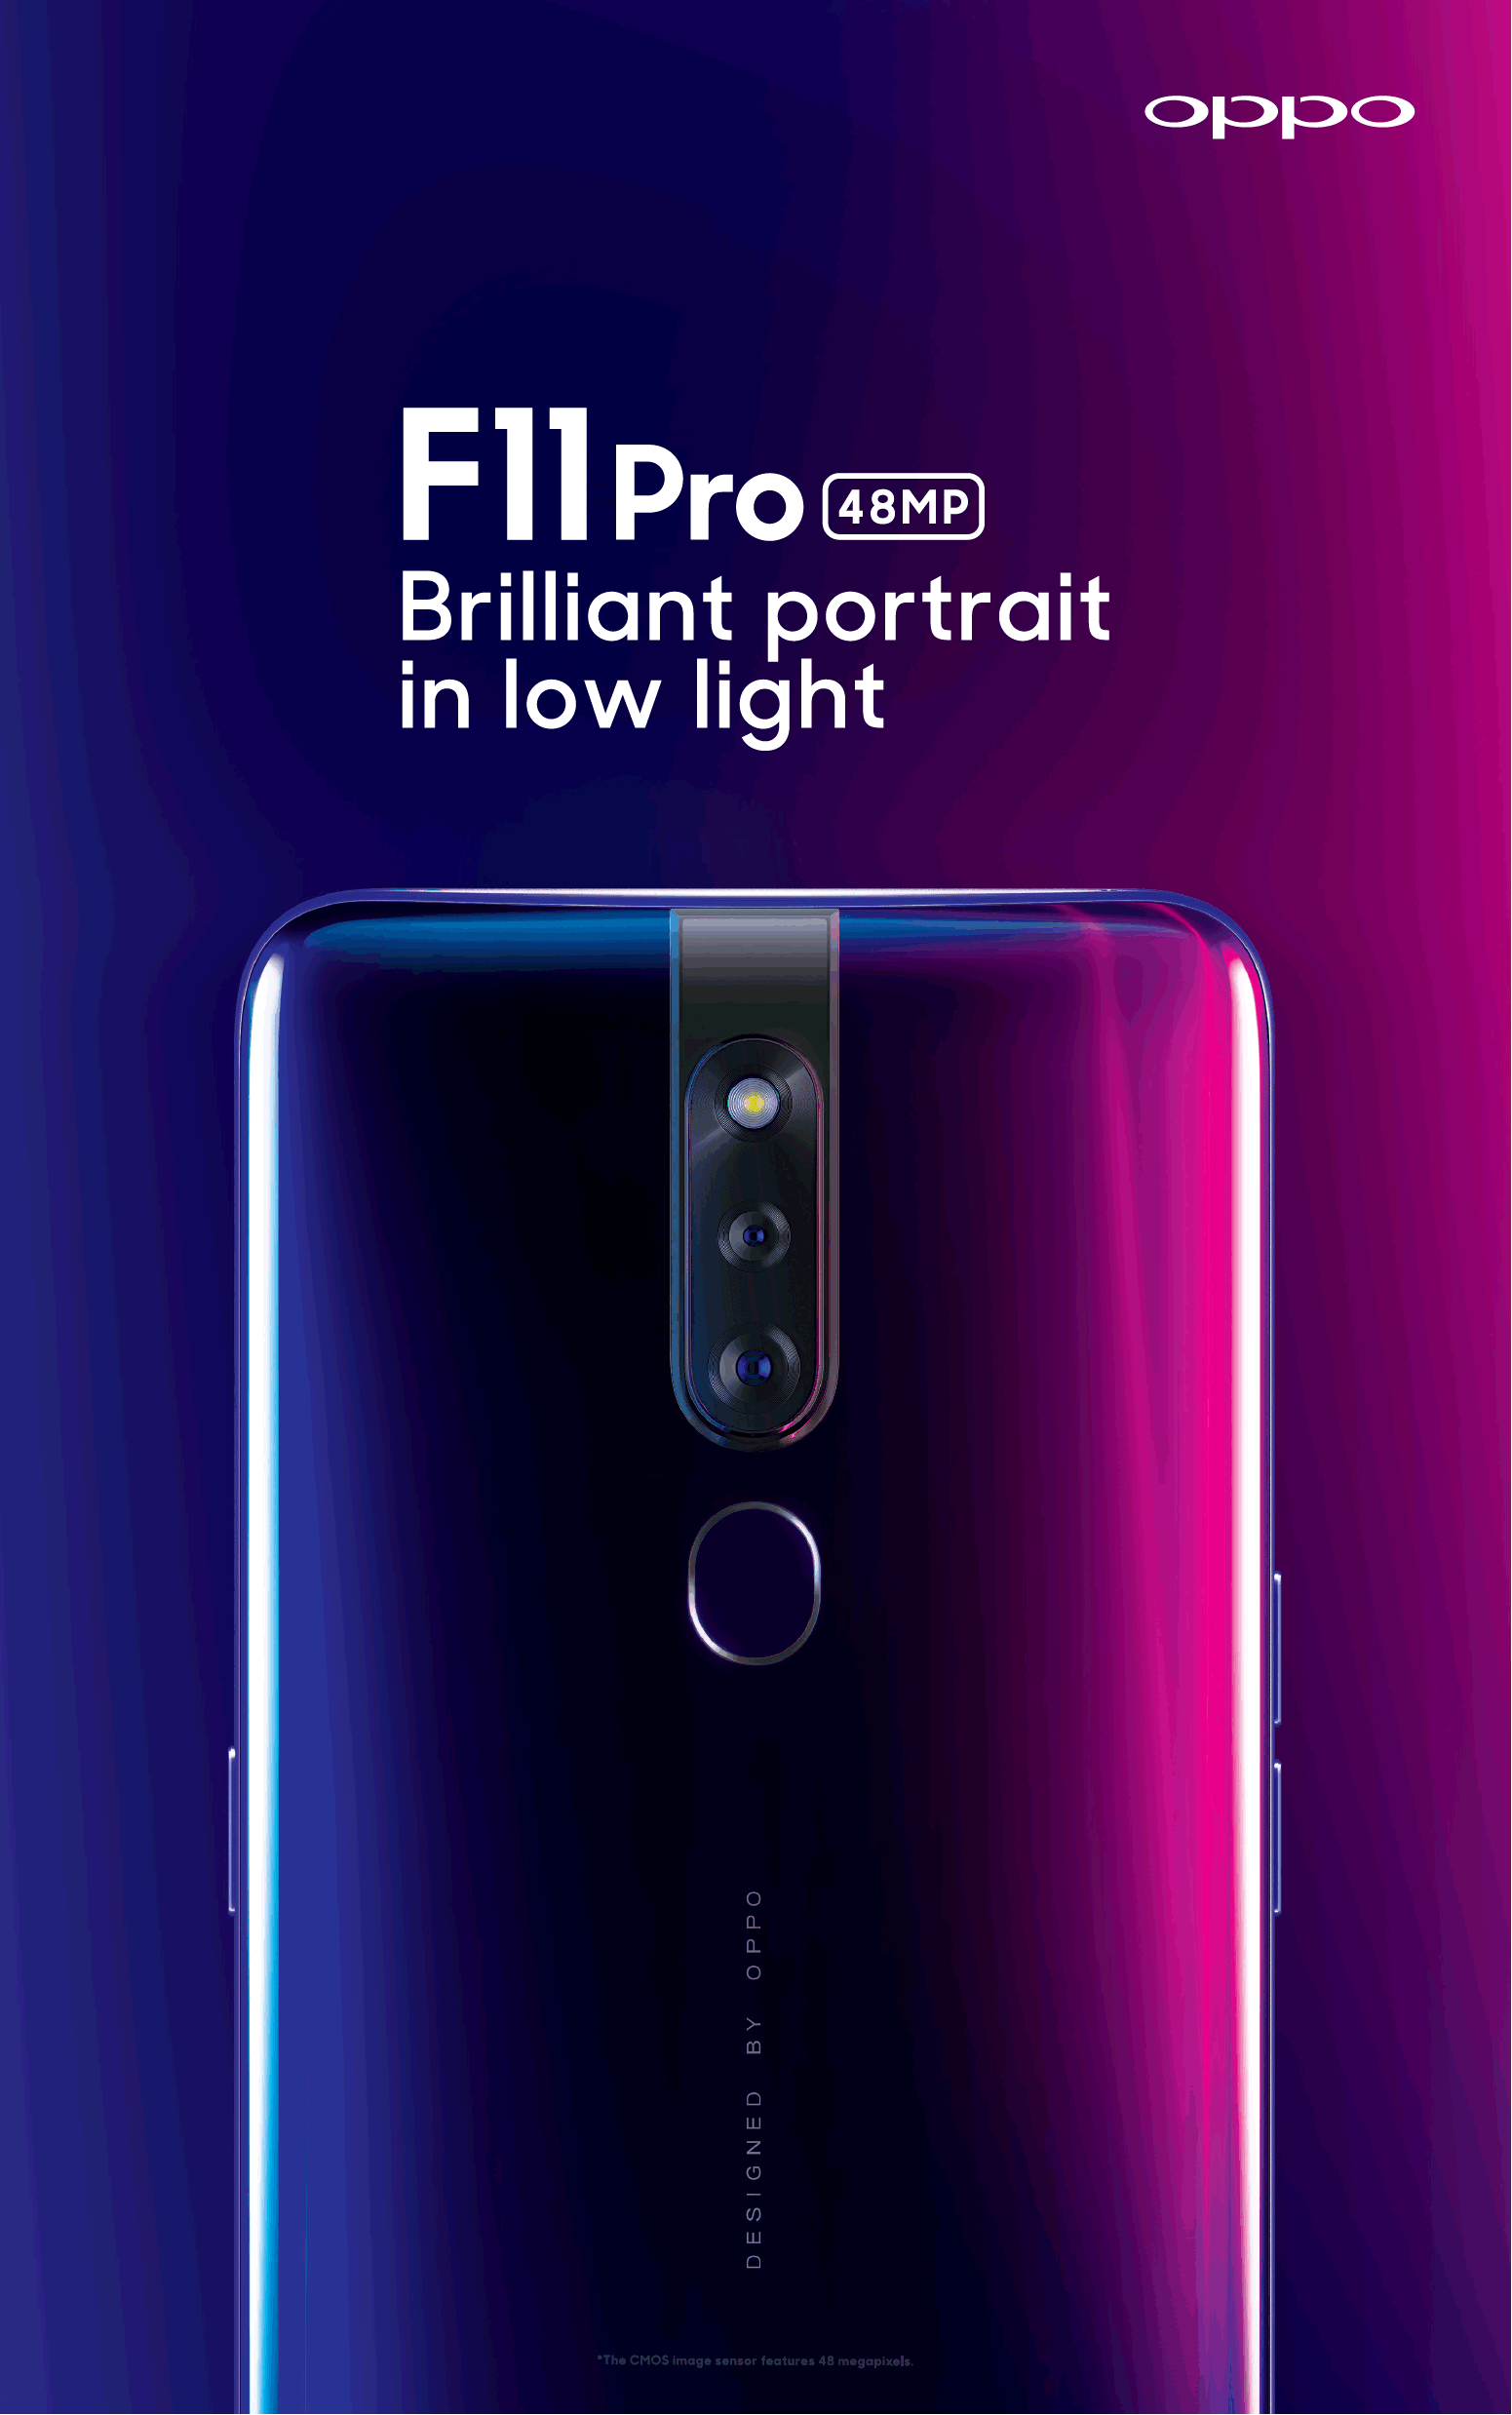 oppo-f11-pro-48mp-brilliant-potrait-in-low-loght-ad-bombay-times-14-02-2019.png